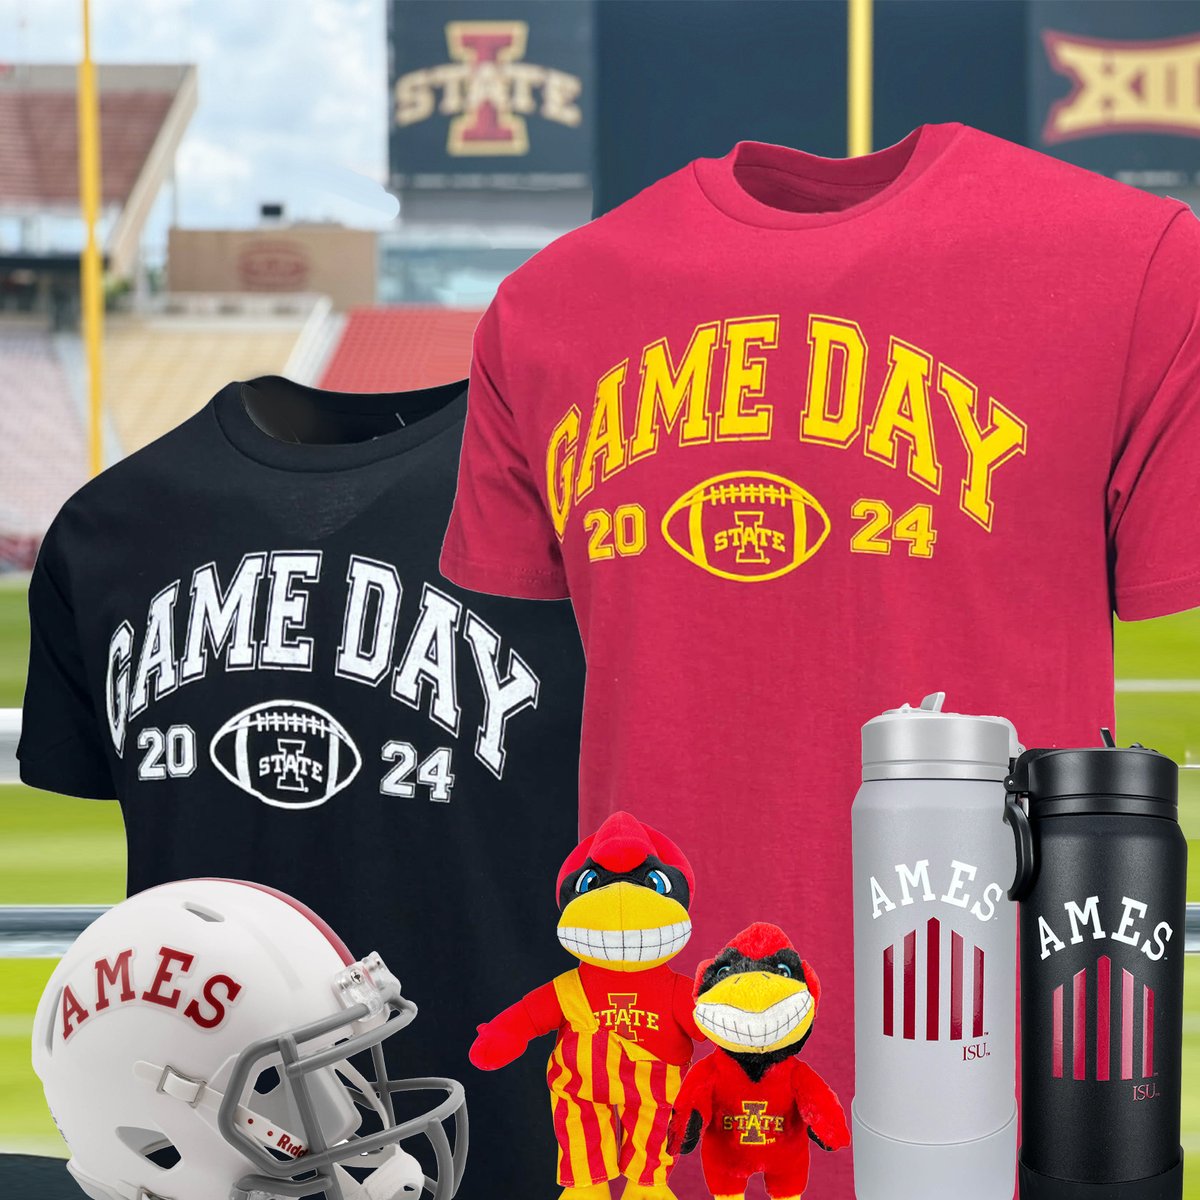 Calling all #Cyclone fans! Prepare for the @CycloneFB spring game 4/20 with perfect gear from #isubookstore. Let's show our spirit, remember, it's tax-free. 🏈🔥 See you in store or find us online at isubookstore.com/features/sport… #gocyclones #CyclONEnation #CyclonesEverywhere #football